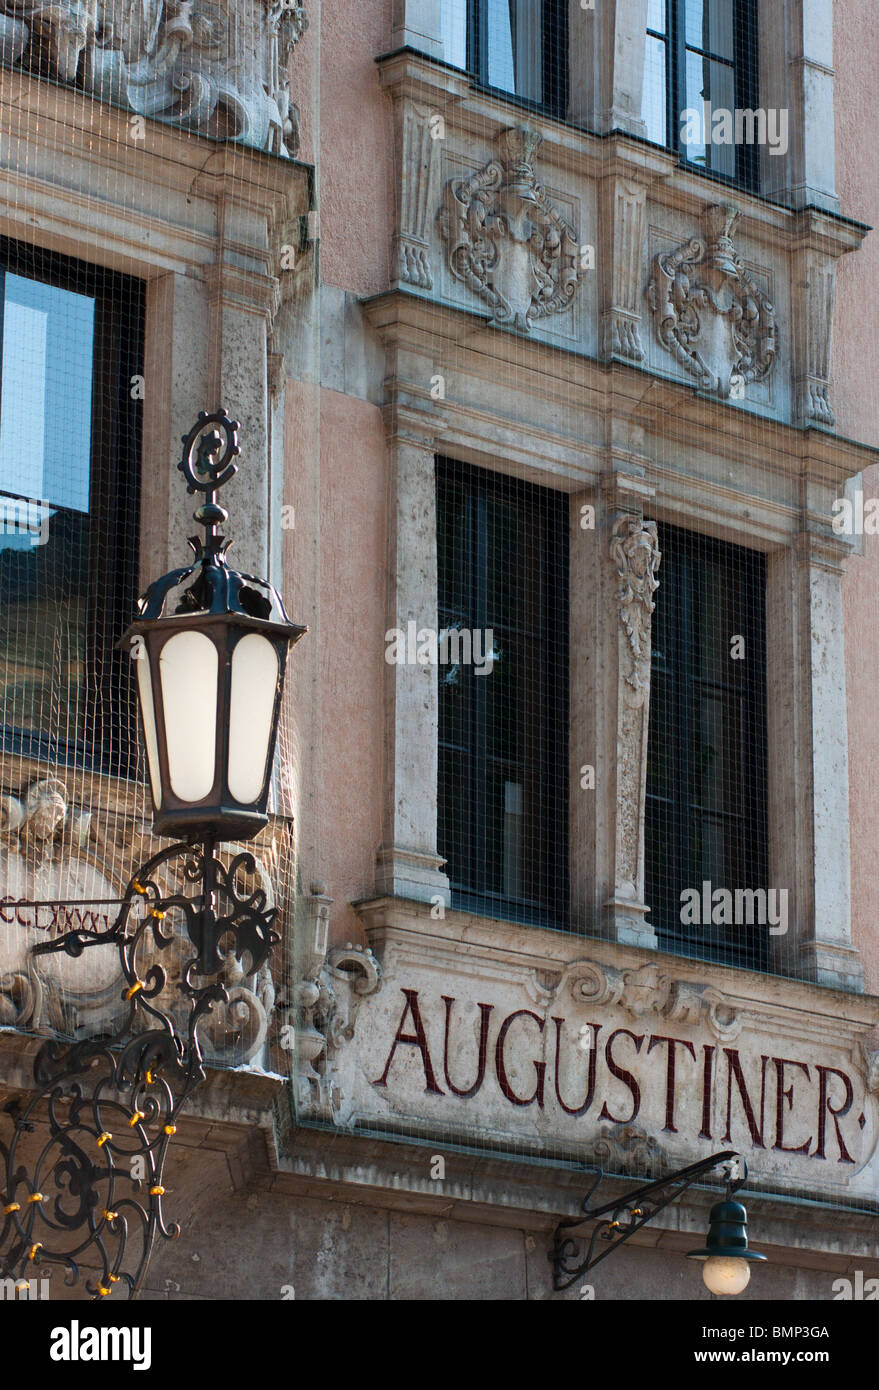 Augustiner beer house/restaurant in central Munich, Germany. Stock Photo